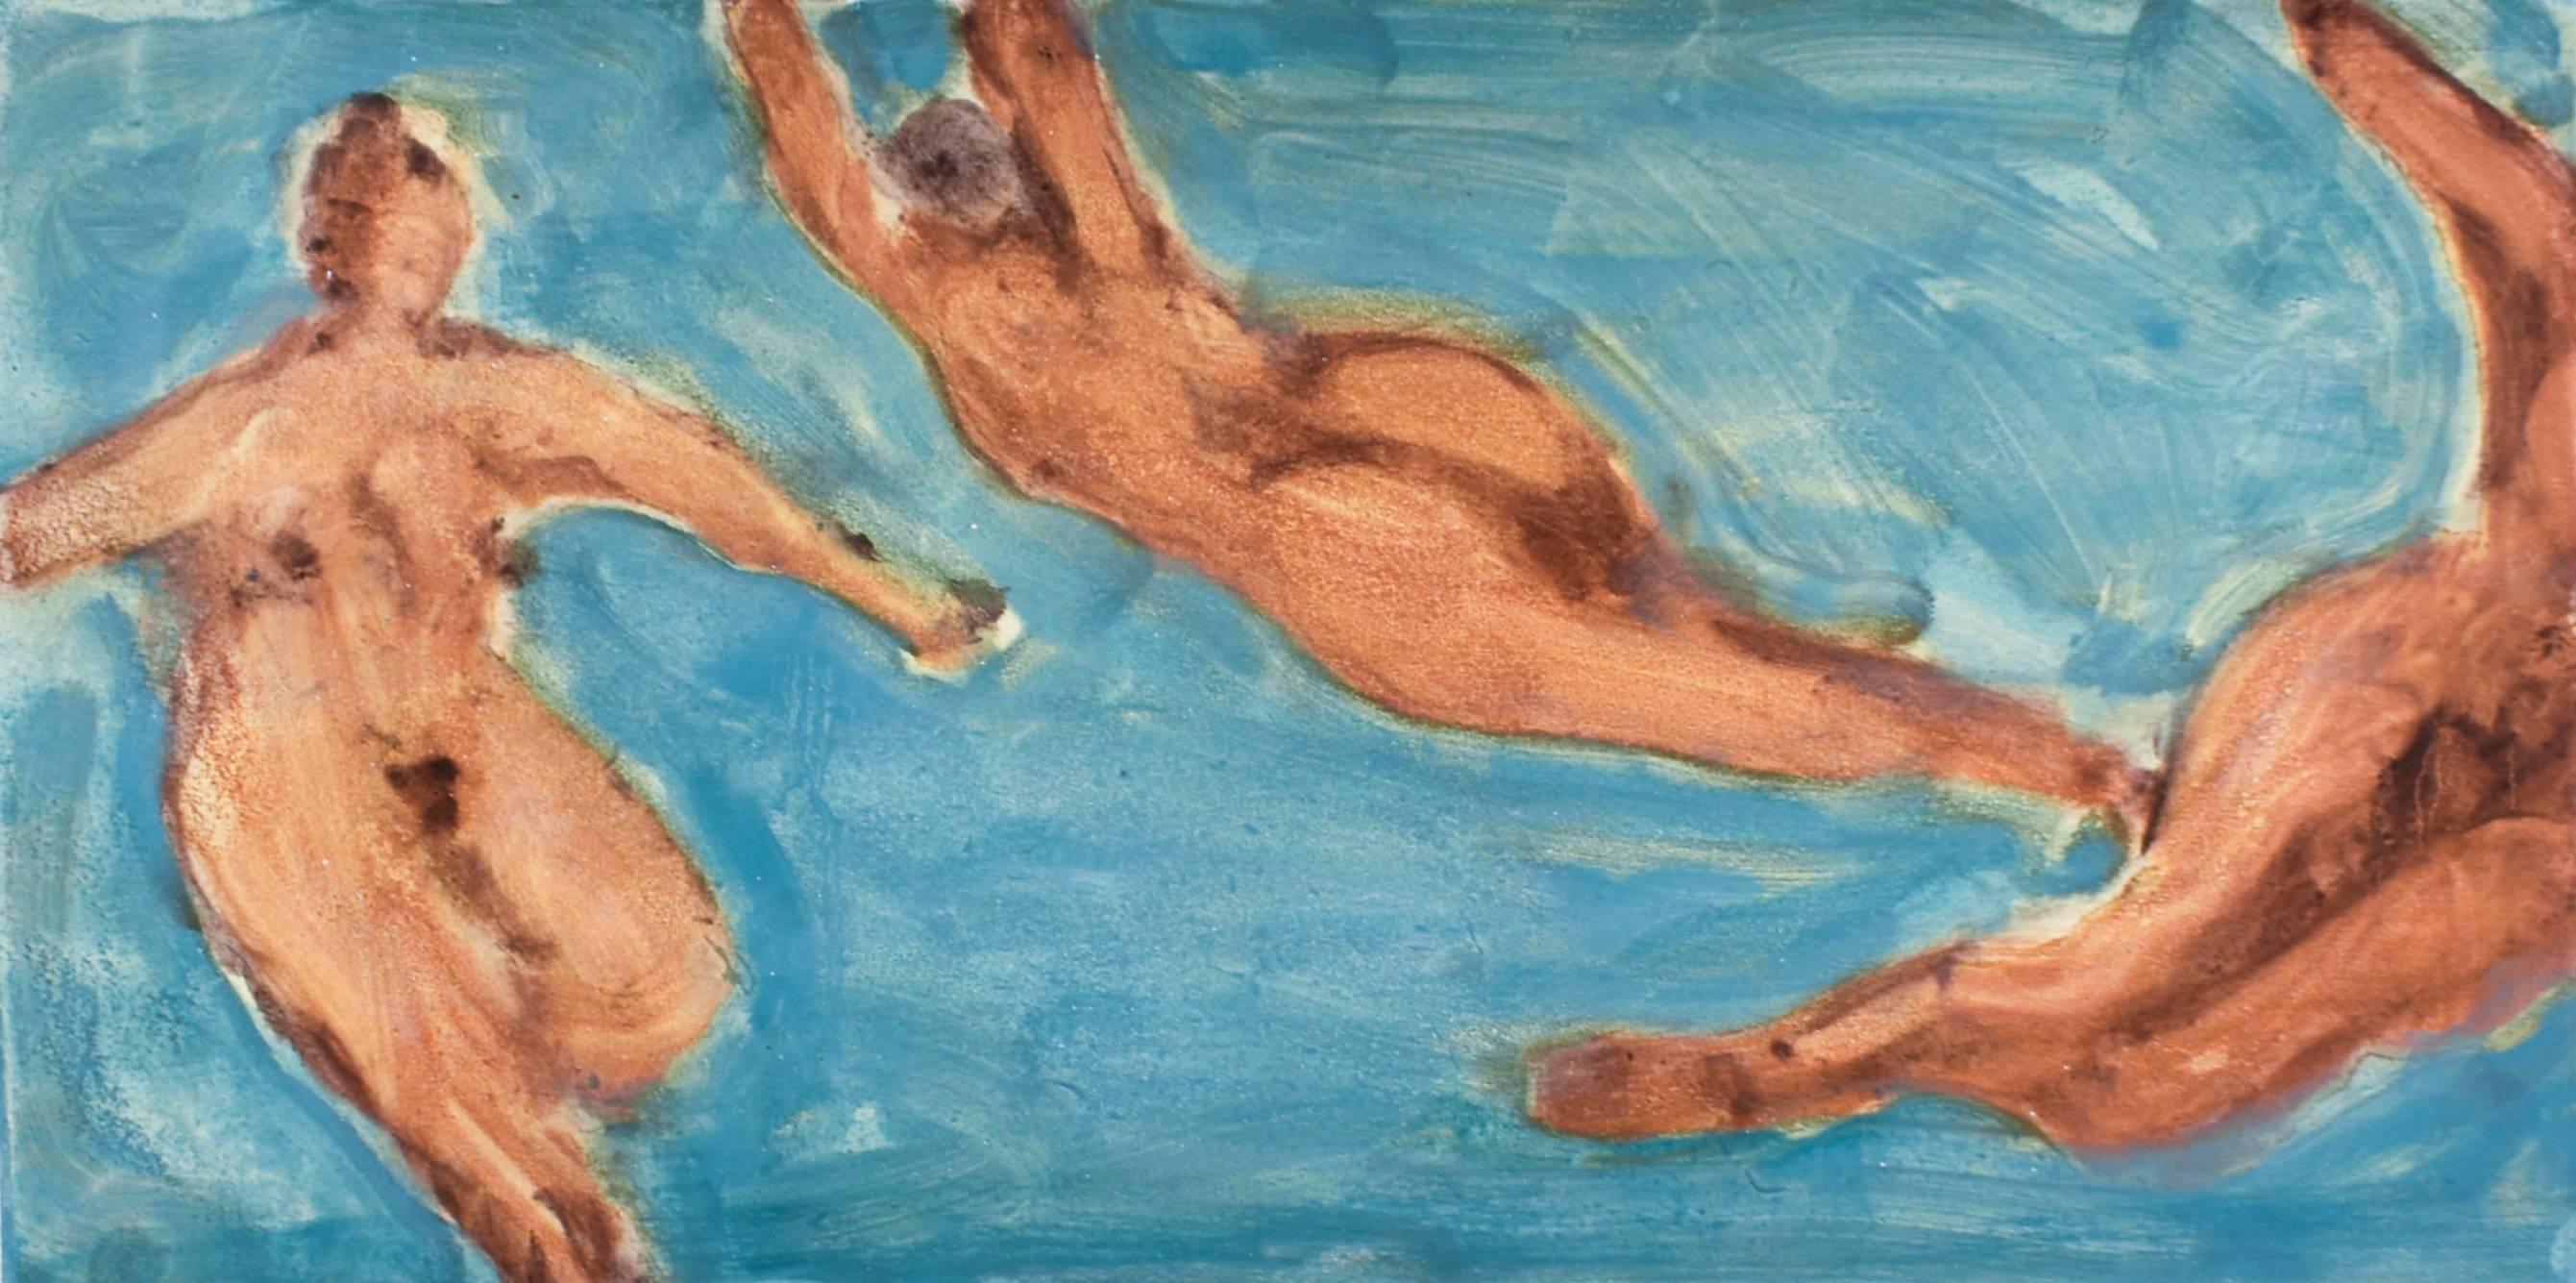 Swimmers (Abstracted Figurative Monotype of Nude Women in Aqua Blue Water)